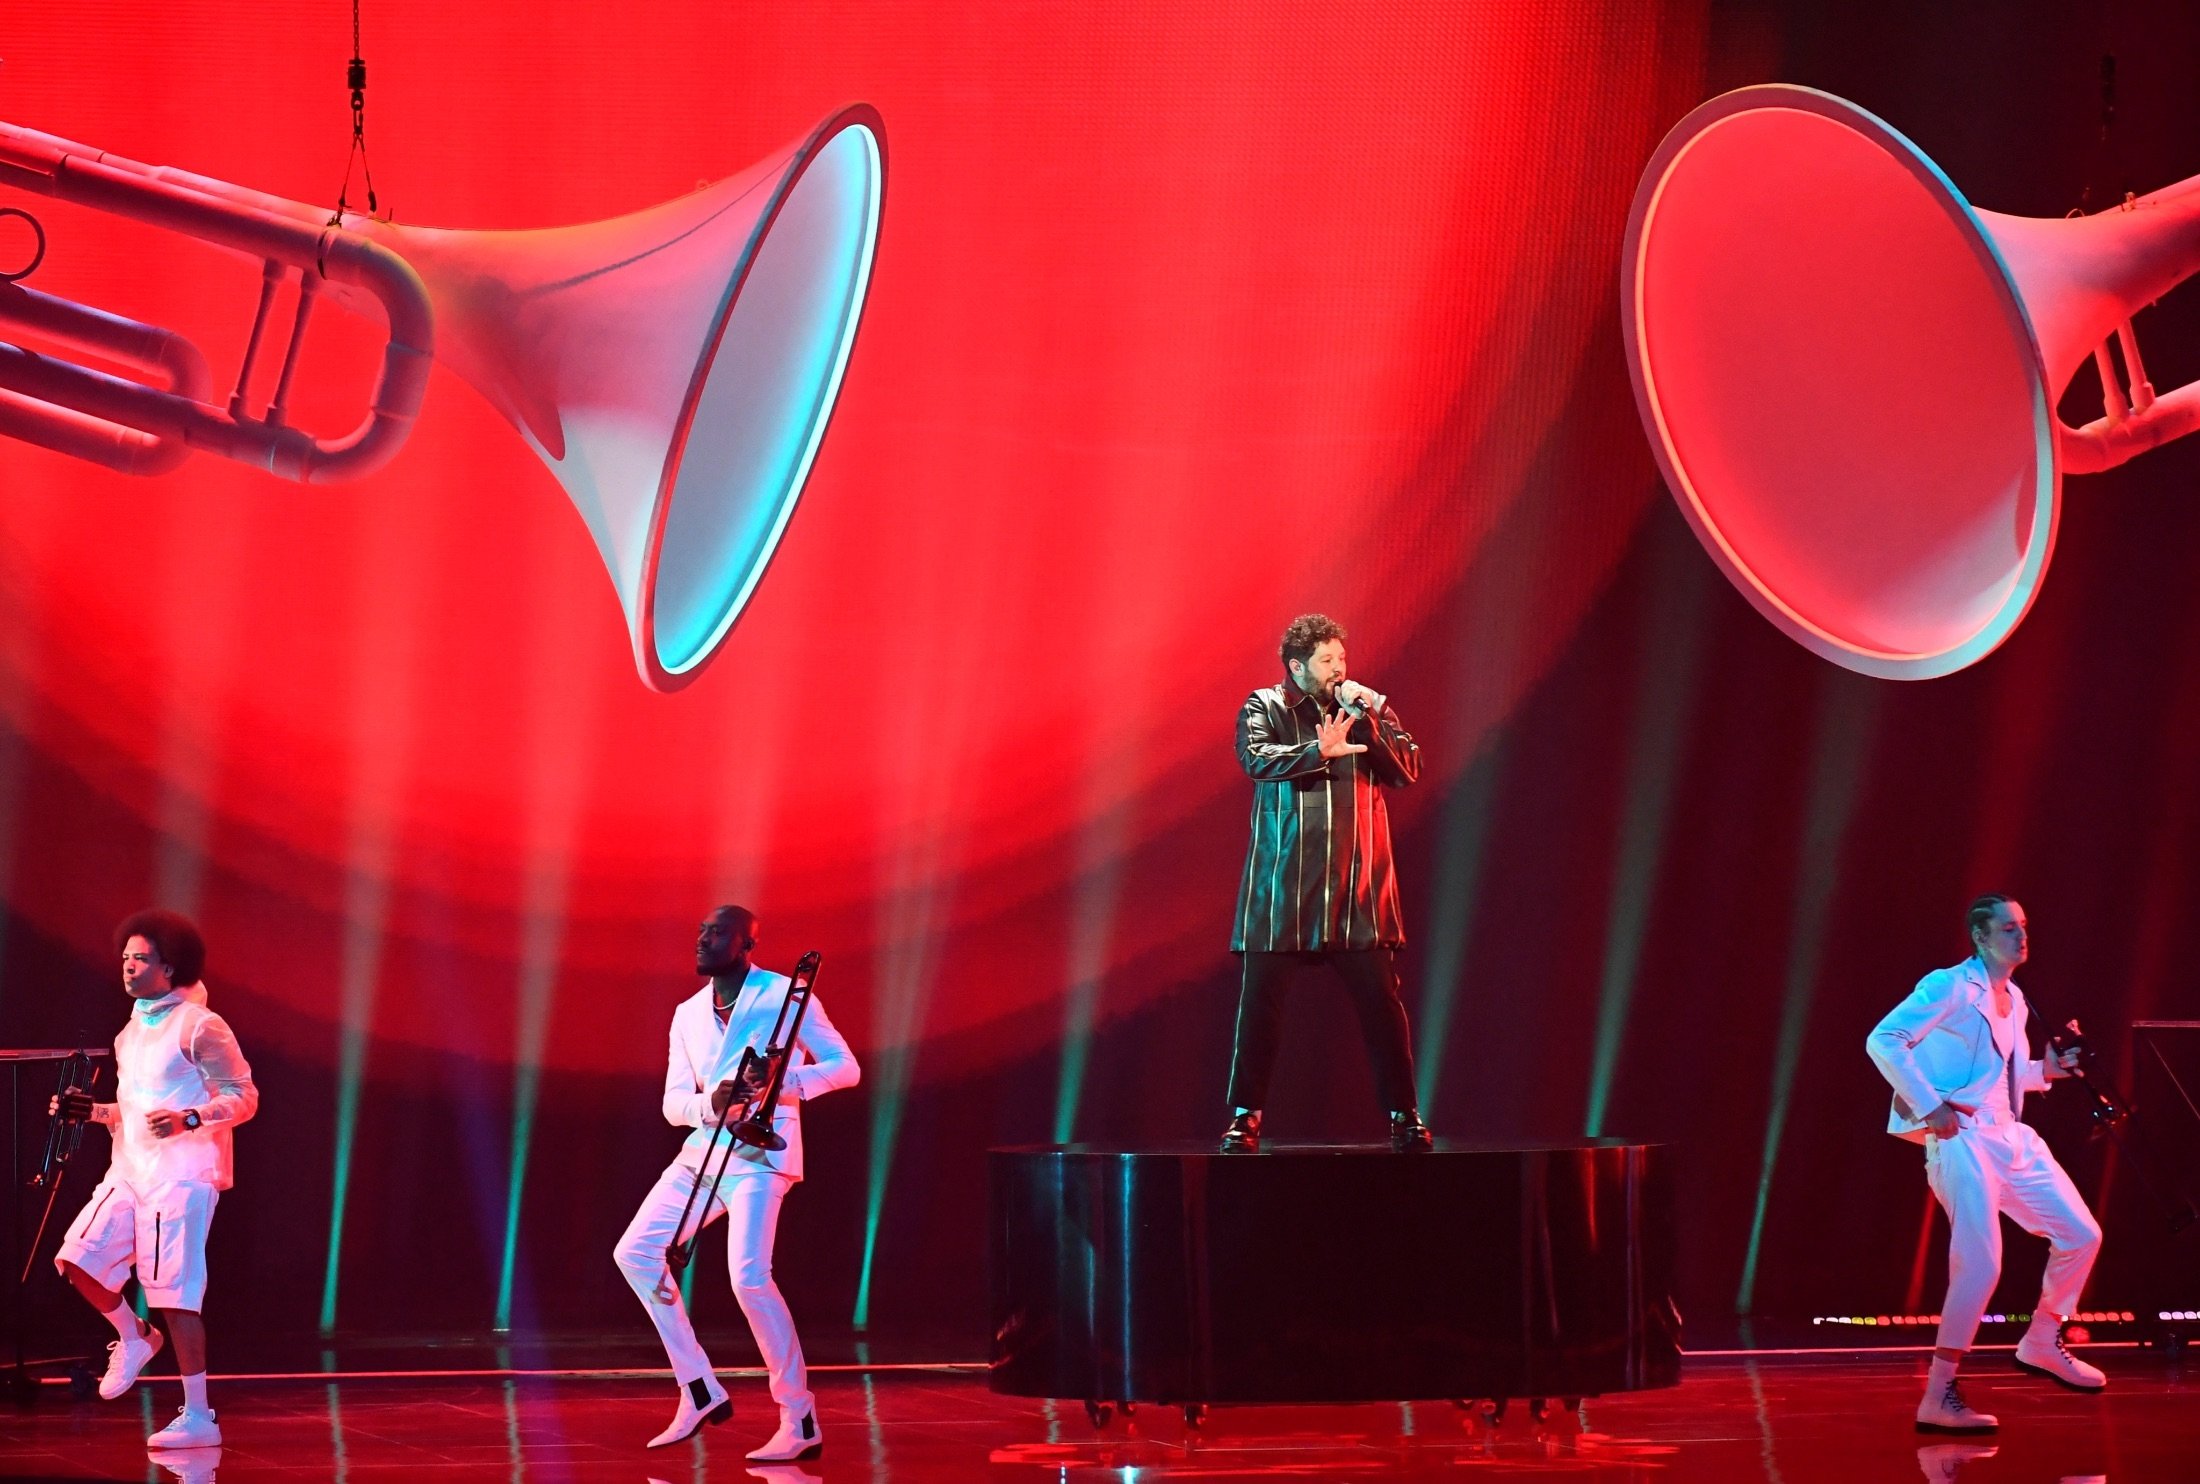 James Newman of the United Kingdom performs during the Jury Grand Final dress rehearsal of the 2021 Eurovision Song Contest in Rotterdam, The Netherlands, May 21, 2021. (Reuters Photo)